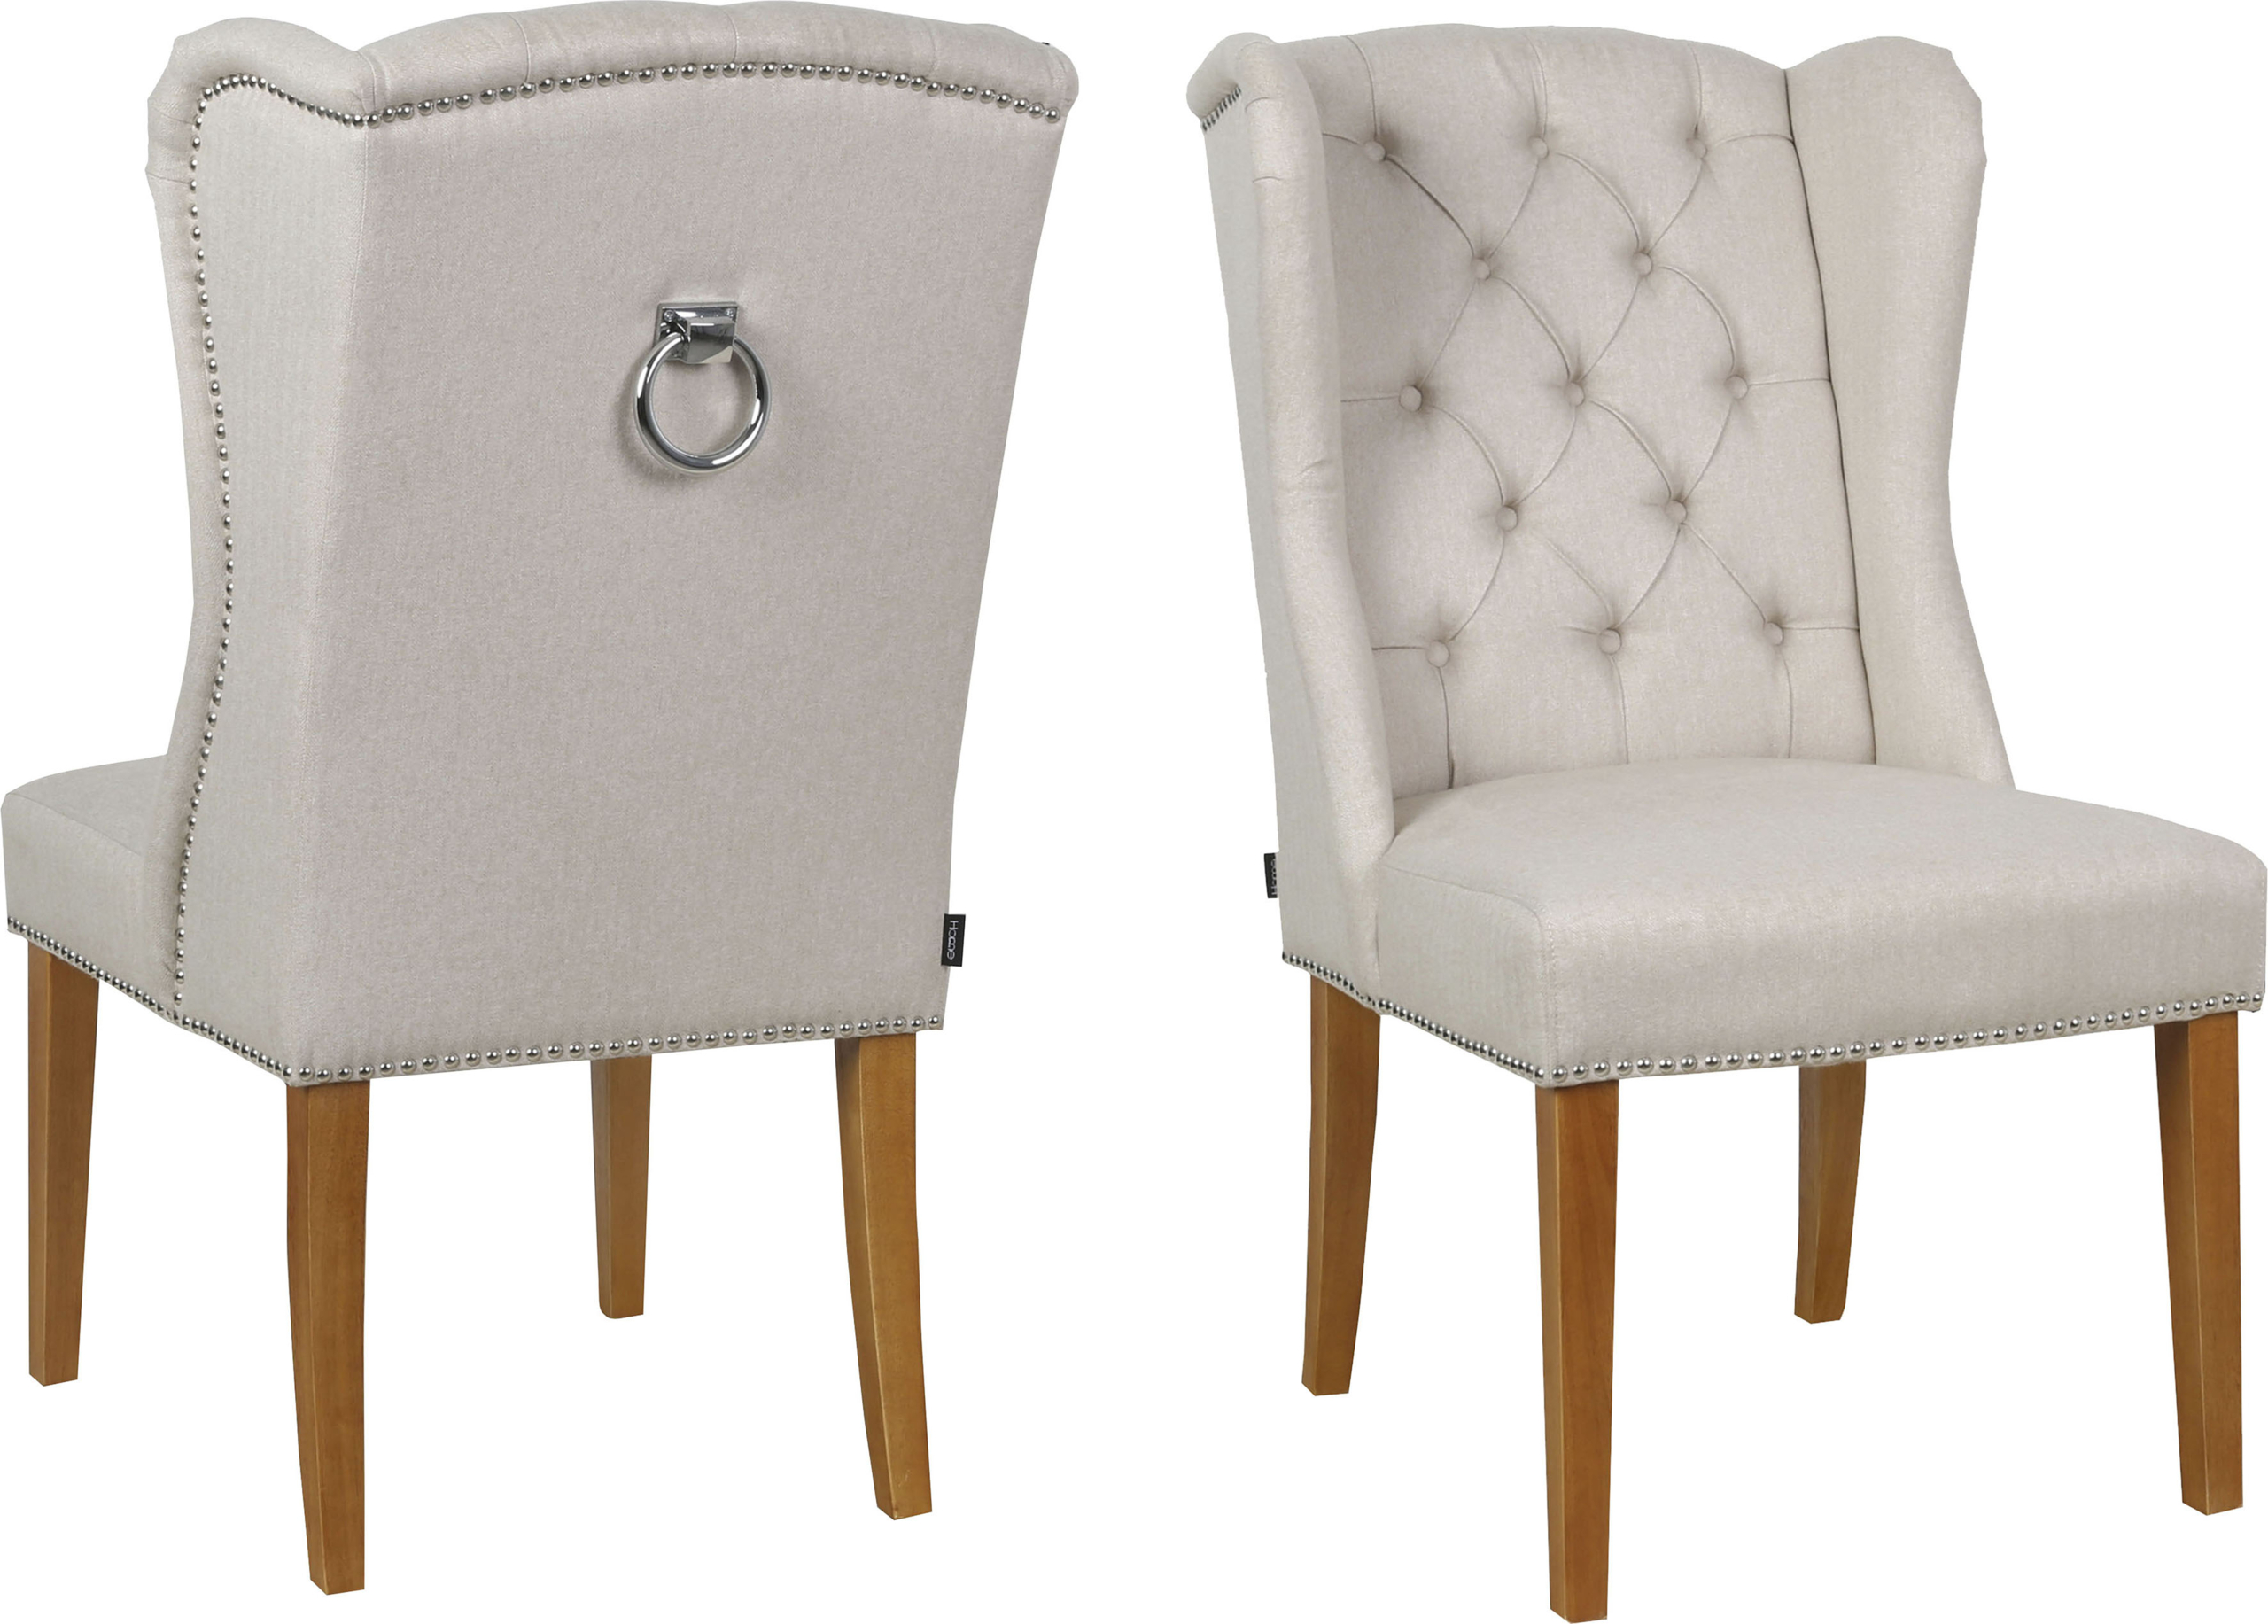 Barrel Chairs For Sale - Ideas on Foter